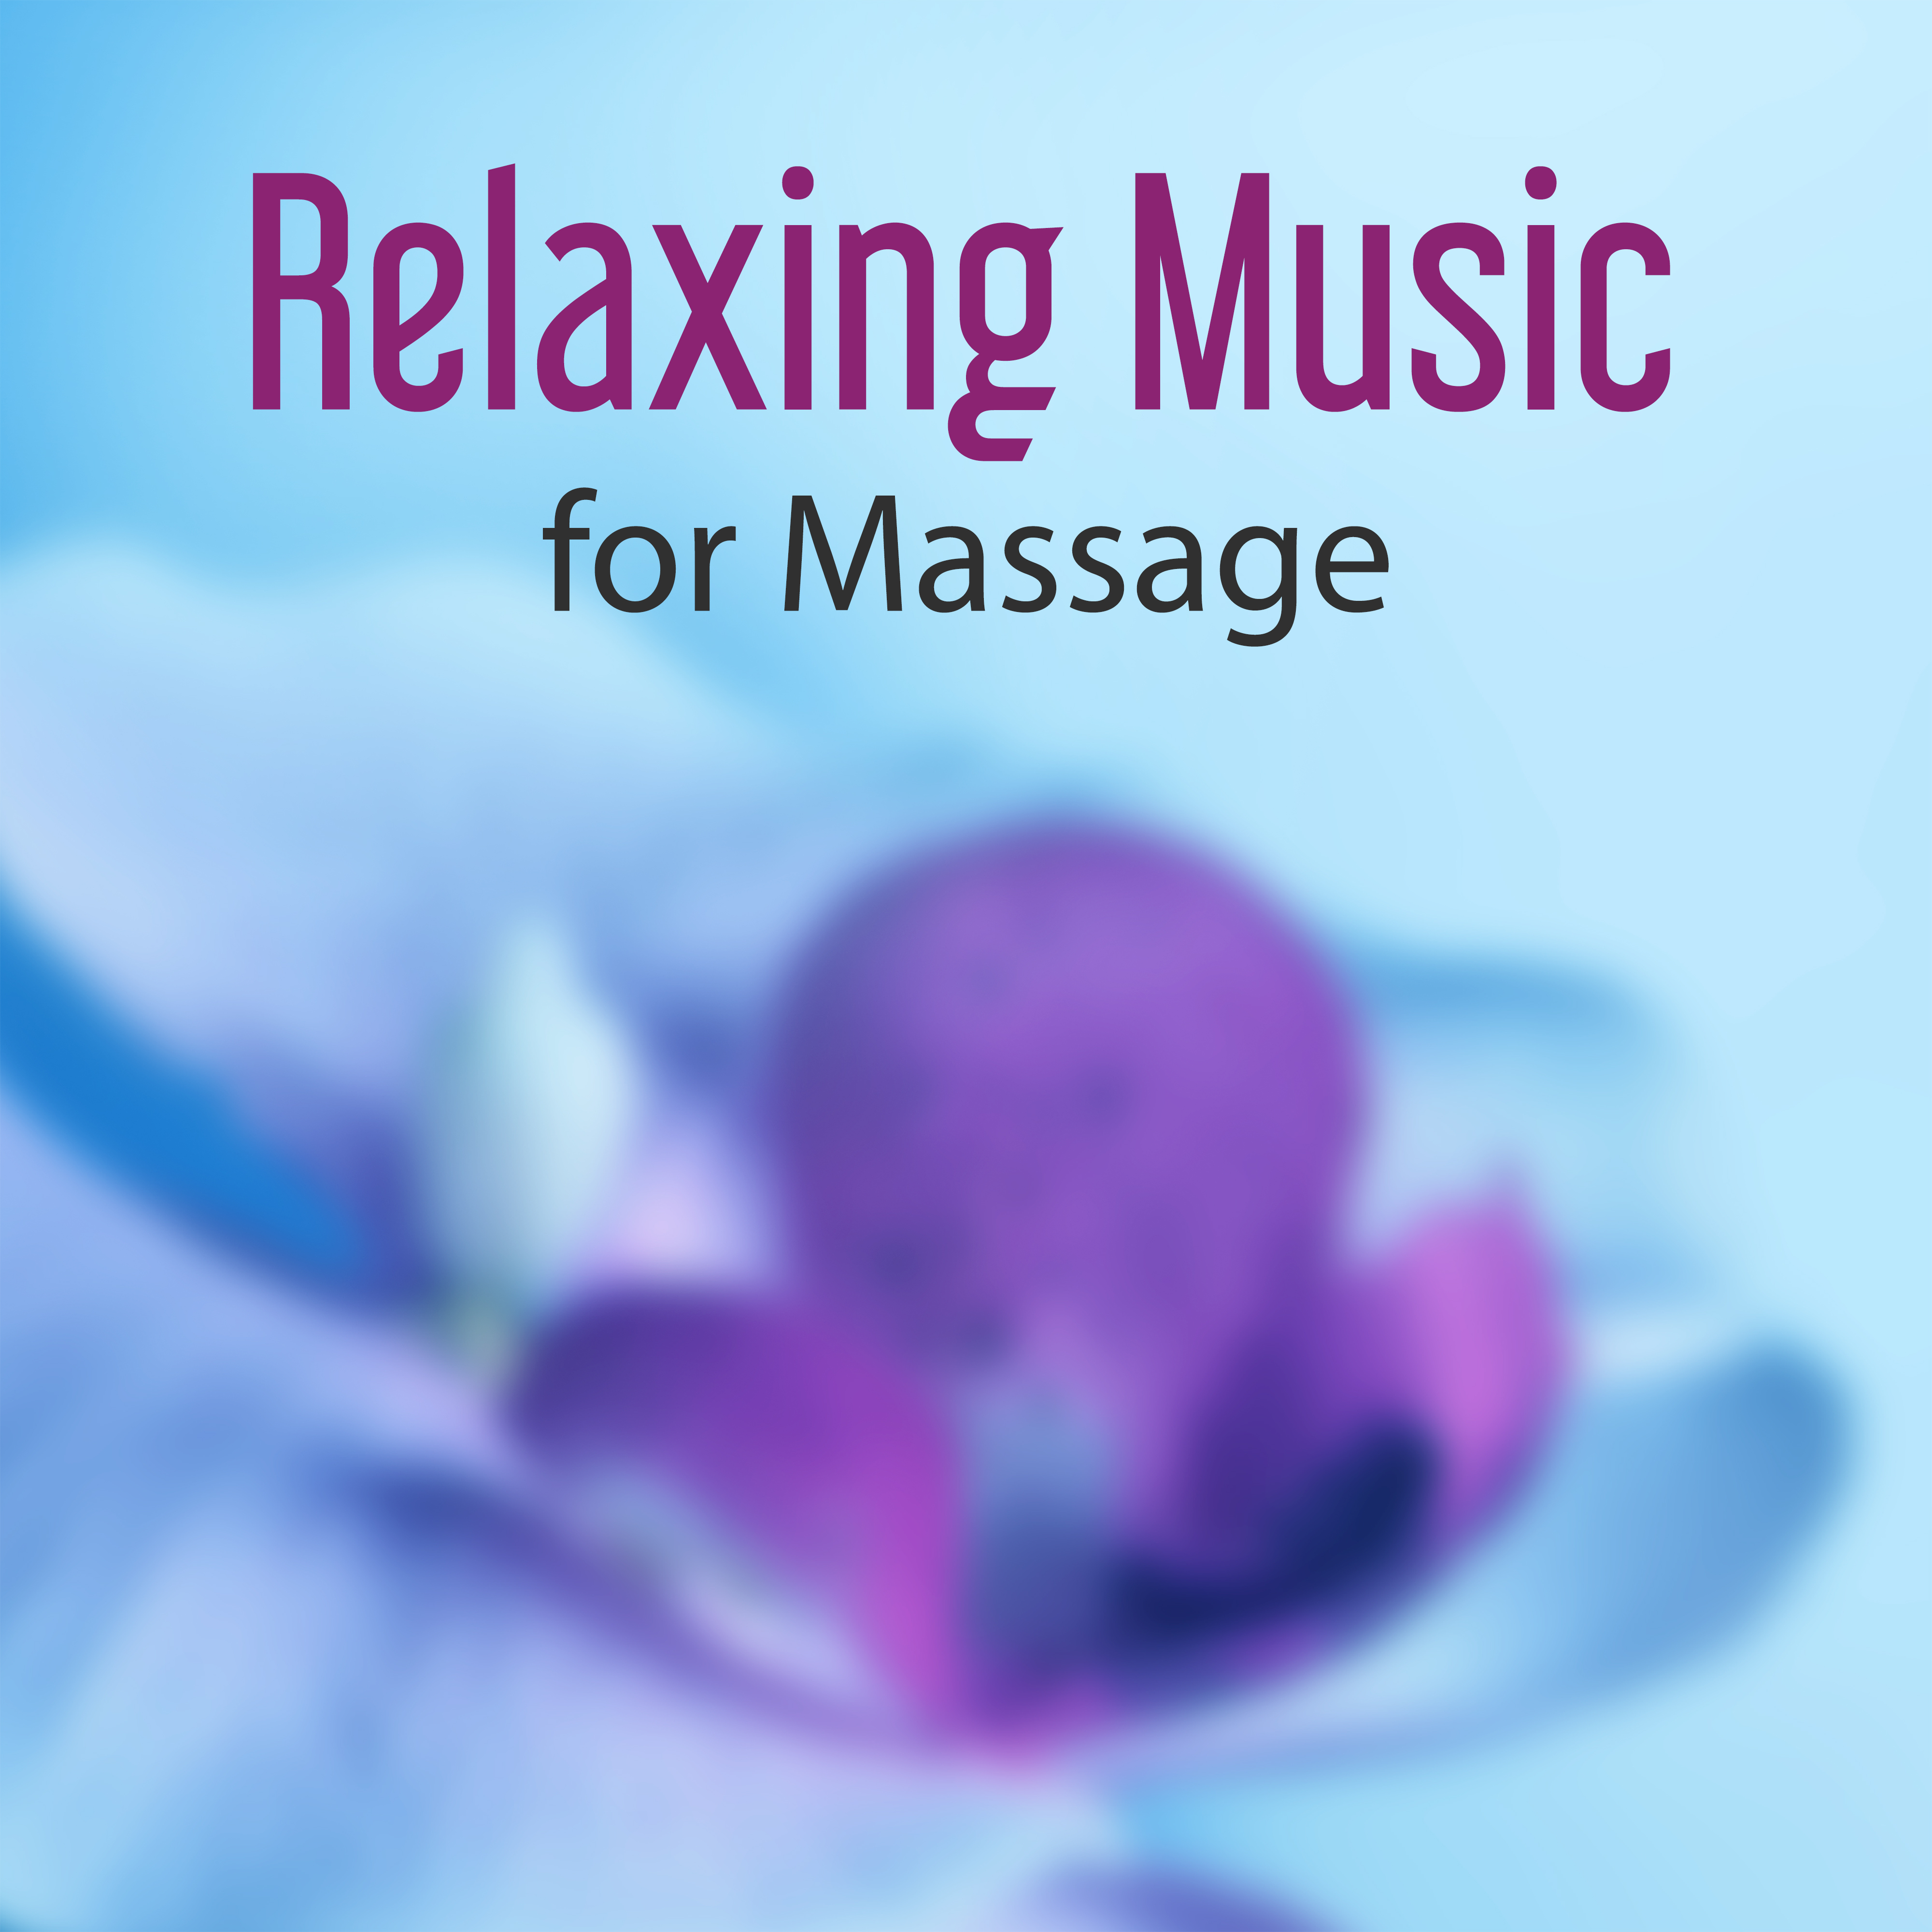 Relaxing Music for Massage  Calming Music for Relaxation, Spa  Wellness Hotel Music, Helpful for Relaxation